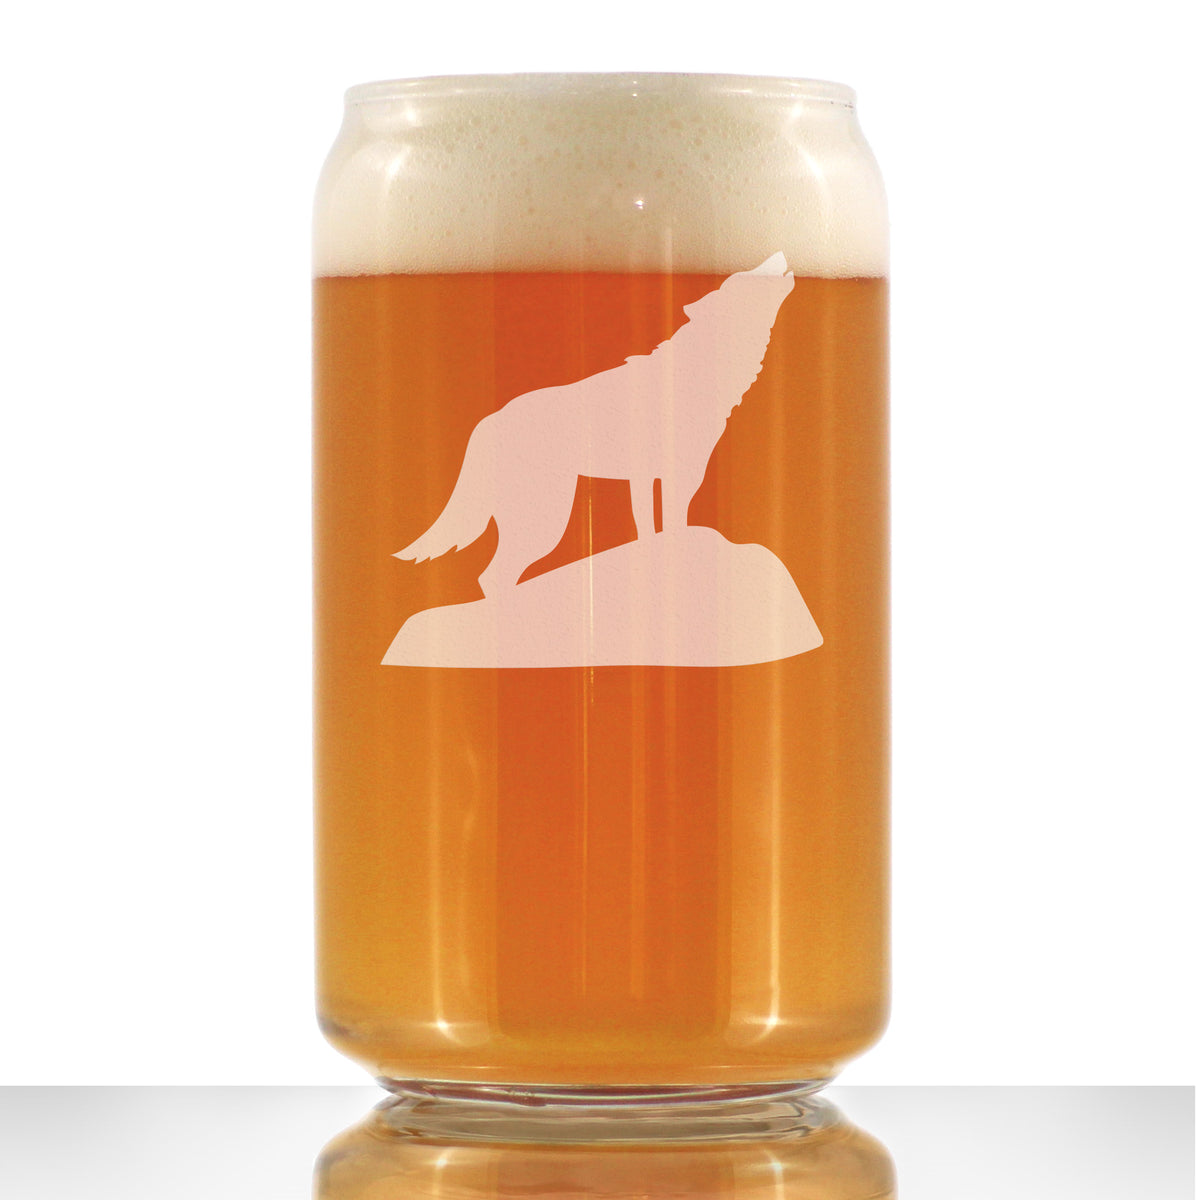 Wolf Beer Can Pint Glass - Cabin Themed Gifts or Rustic Decor for Men and Women - Fun Drinking or Party Glasses - 16 oz